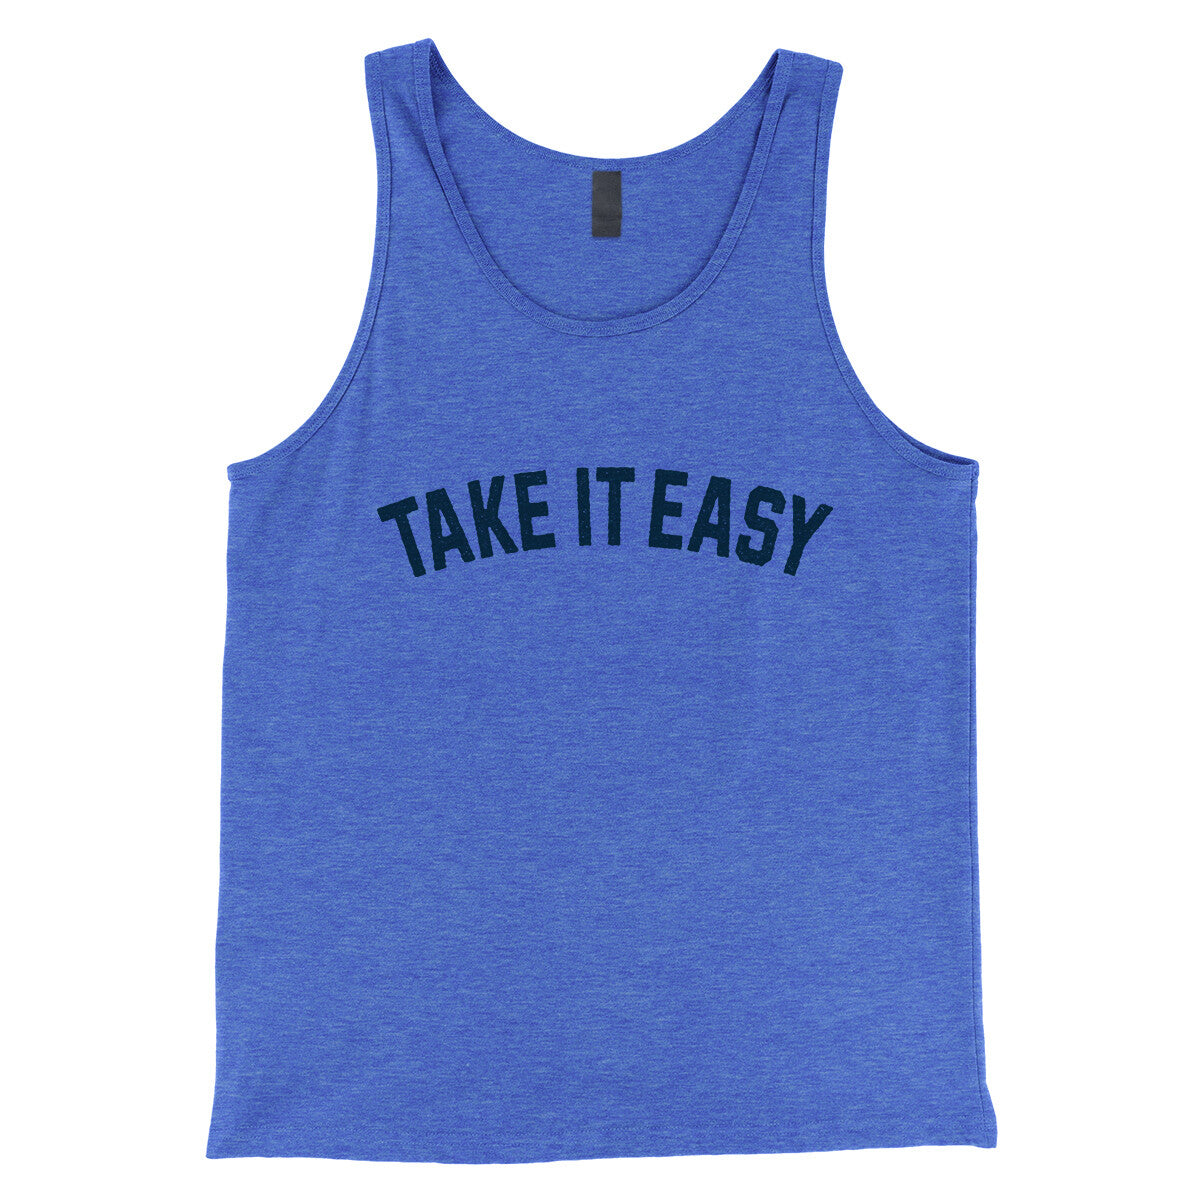 Take it Easy in True Royal TriBlend Color